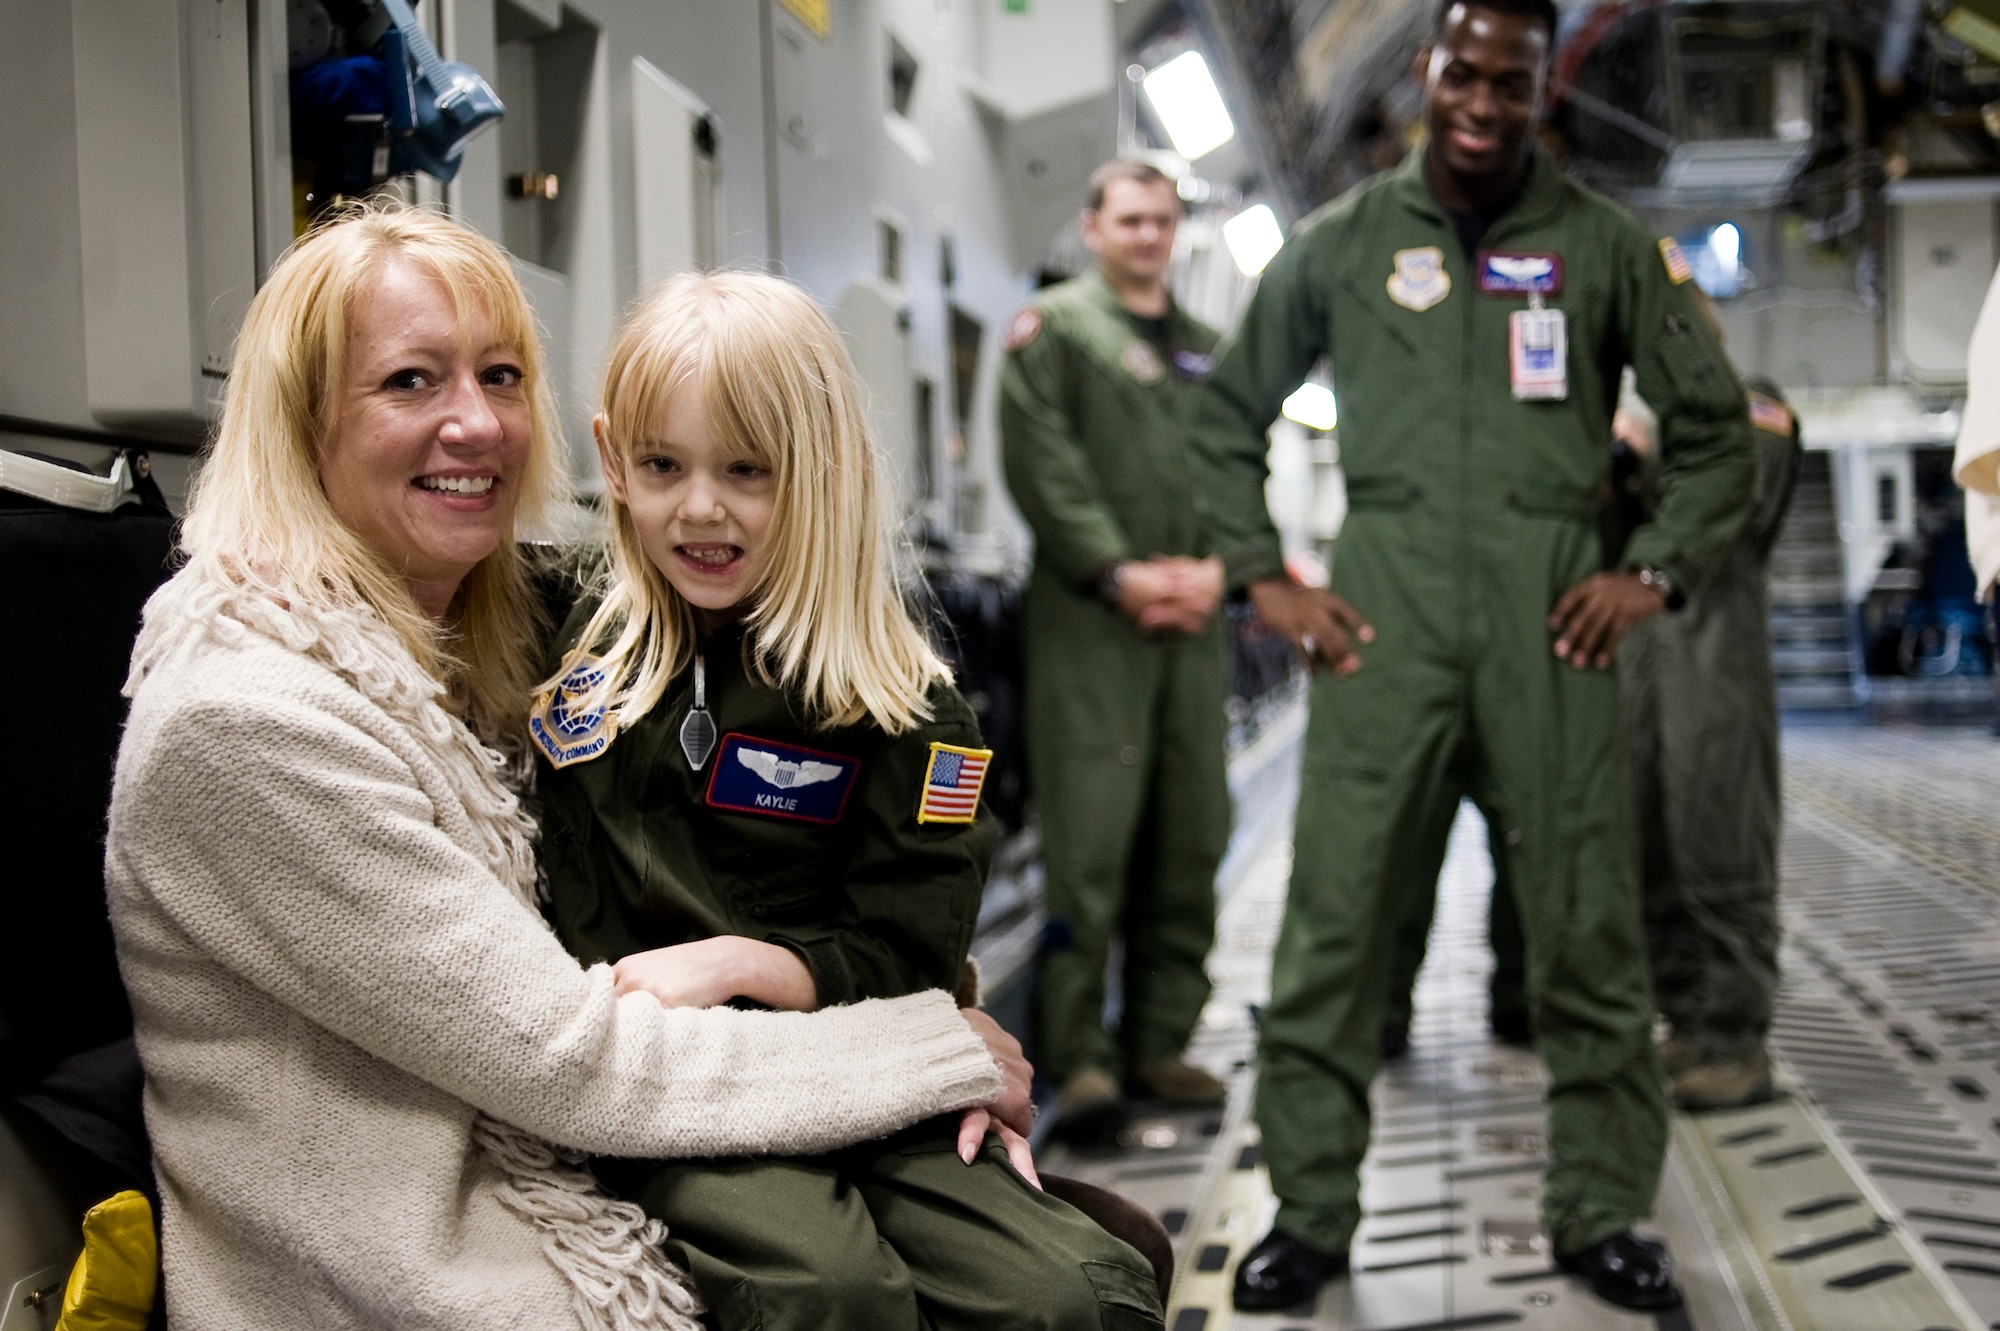 Pilot for a Day candidate Kaylie Bergen, age 6, and her mother Christy pause for a photo while touring a C-17 Globemaster III May 11 as part of McChord Field's Pilot for a Day program. (U.S. Air Force Photo by Abner Guzman)

